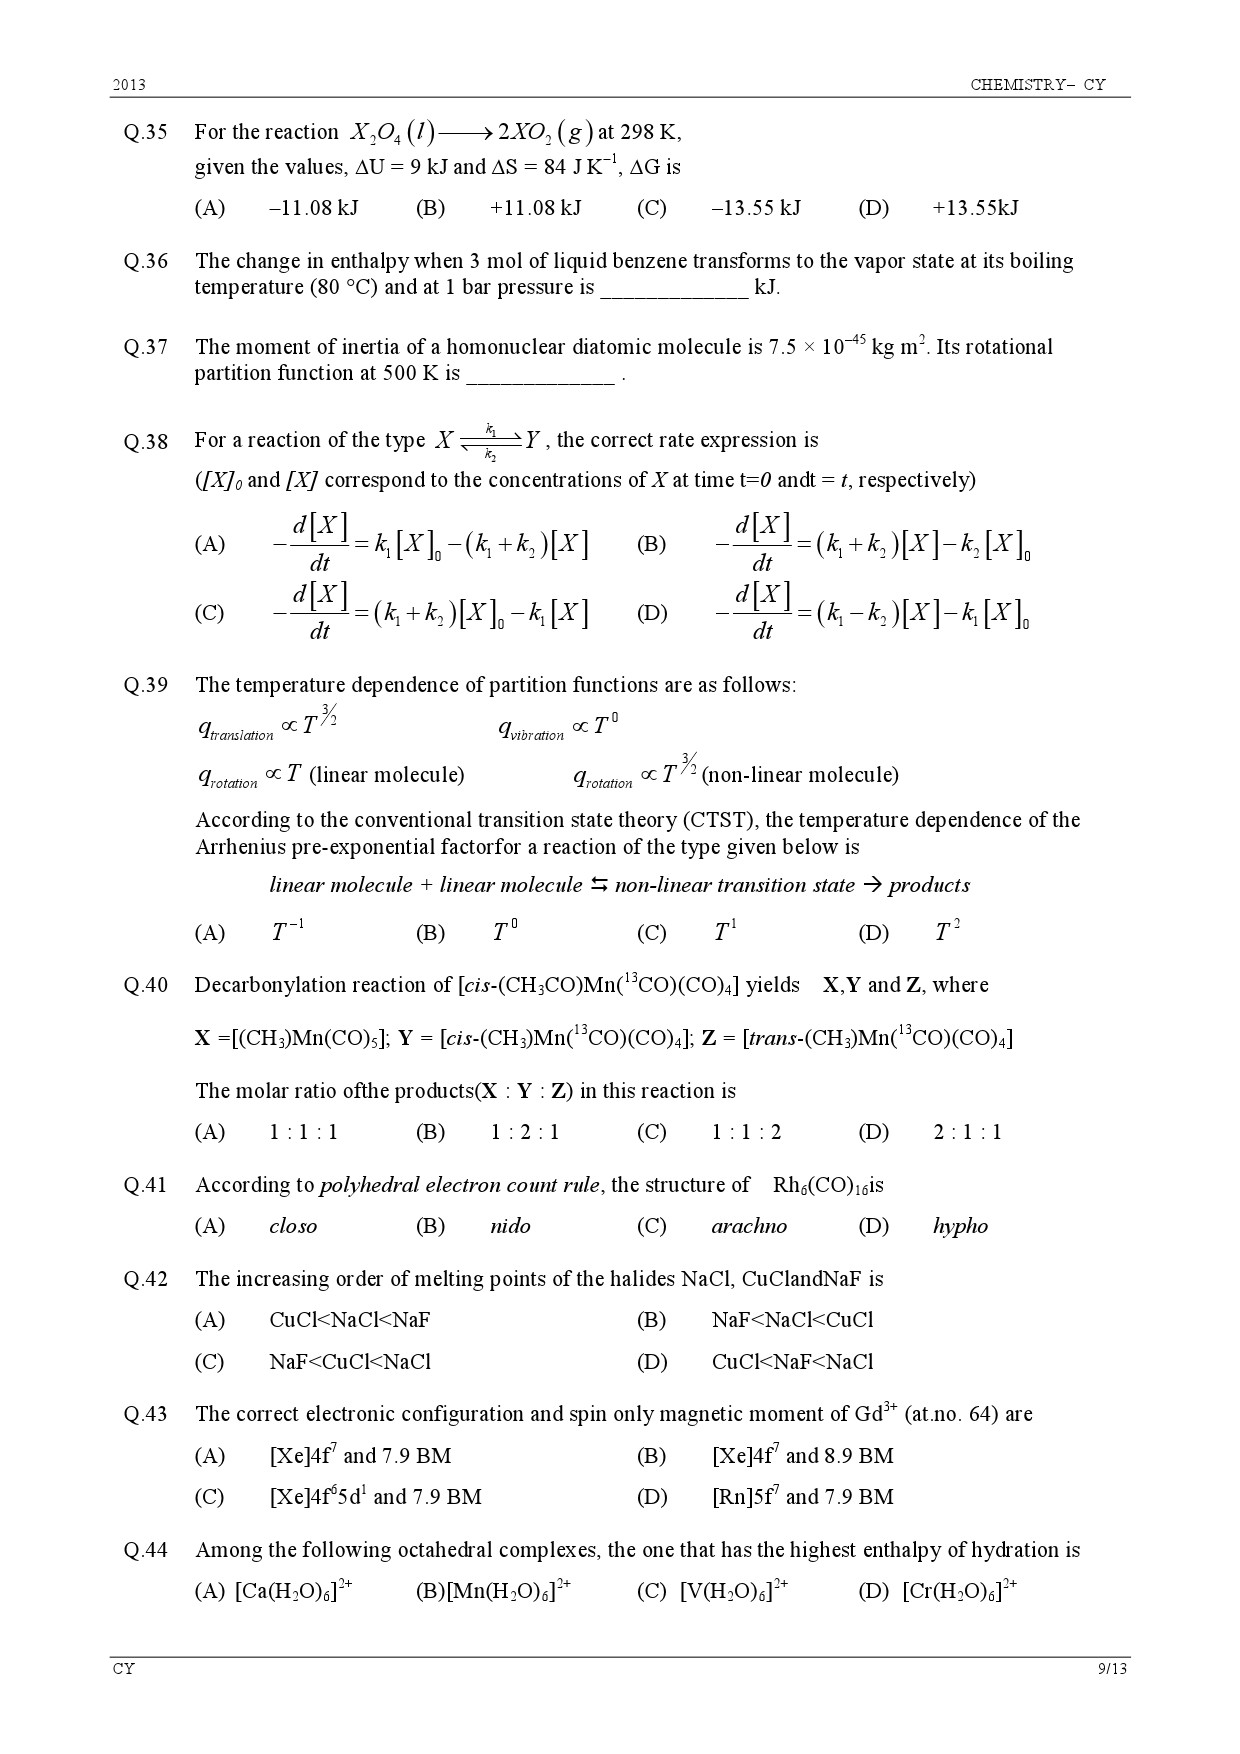 GATE Exam Question Paper 2013 Chemistry 9